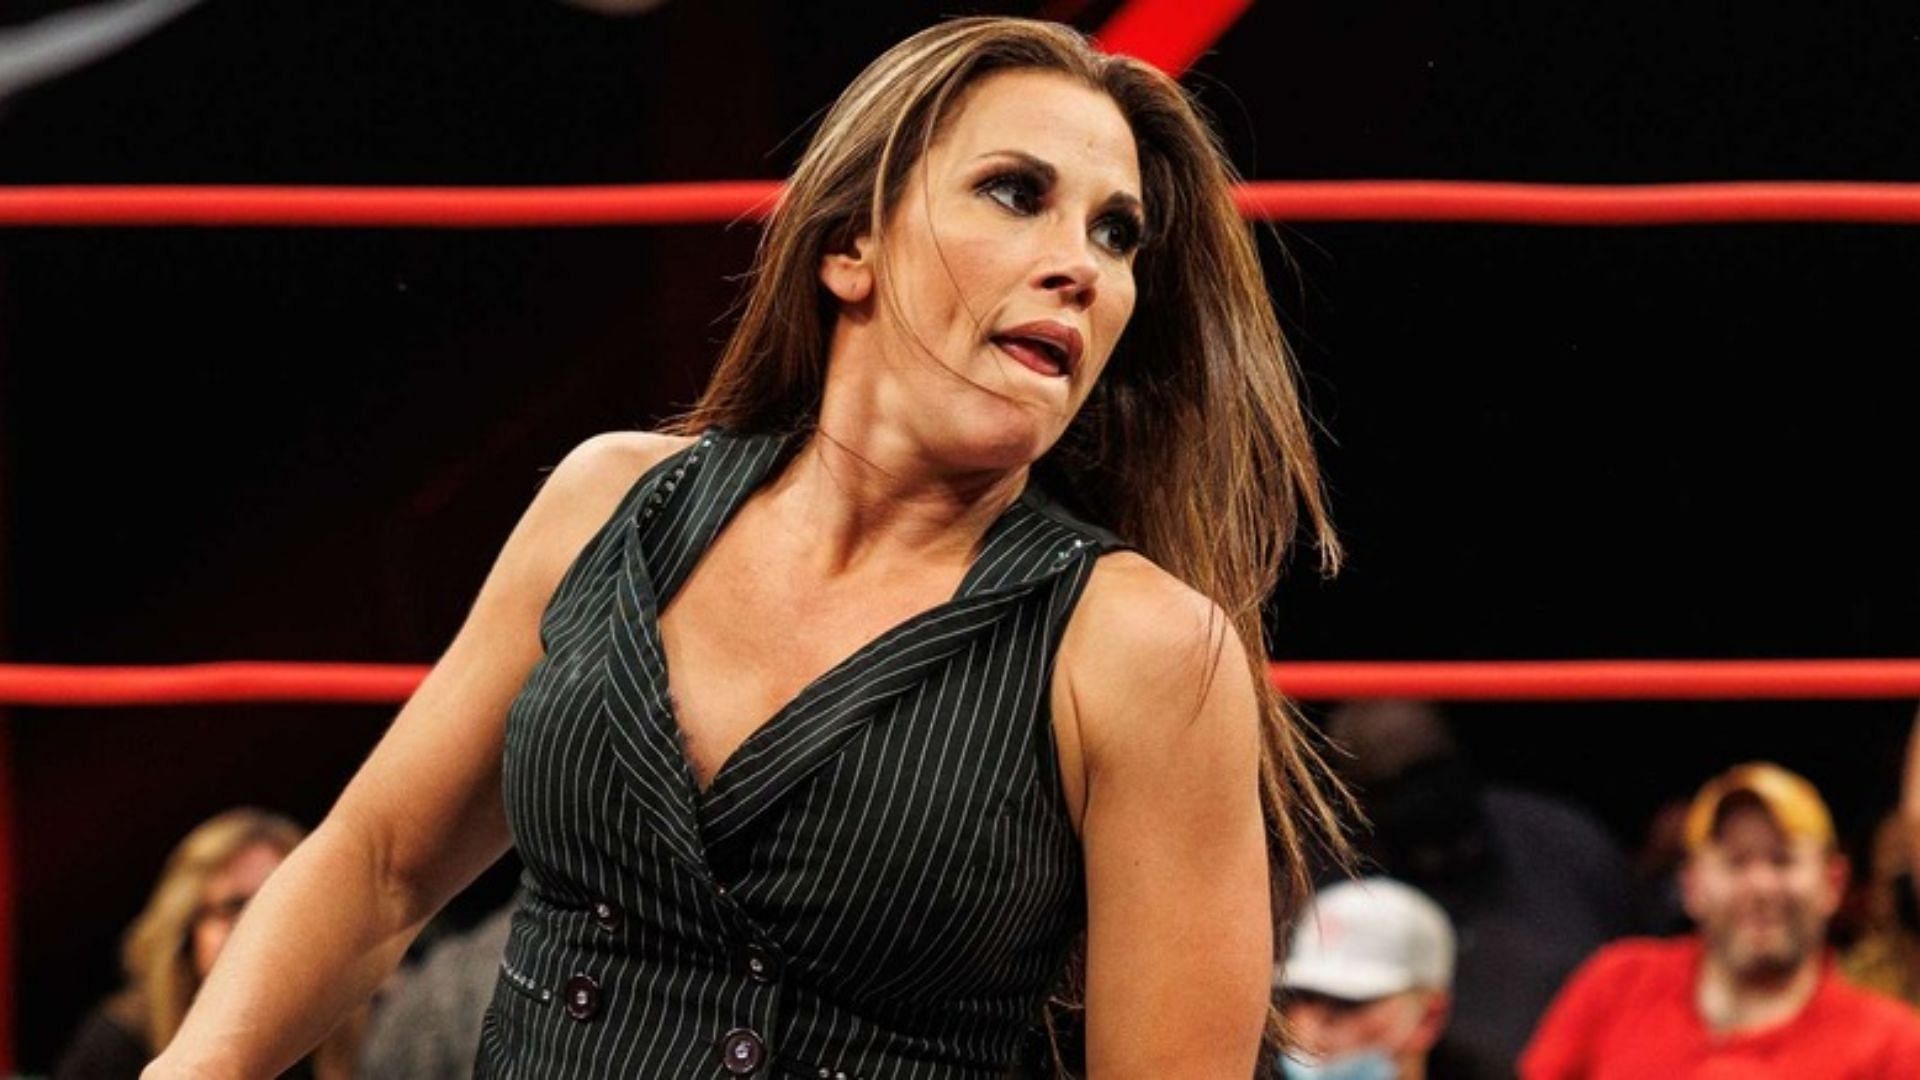 Mickie James is currently an IMPACT Wrestling star